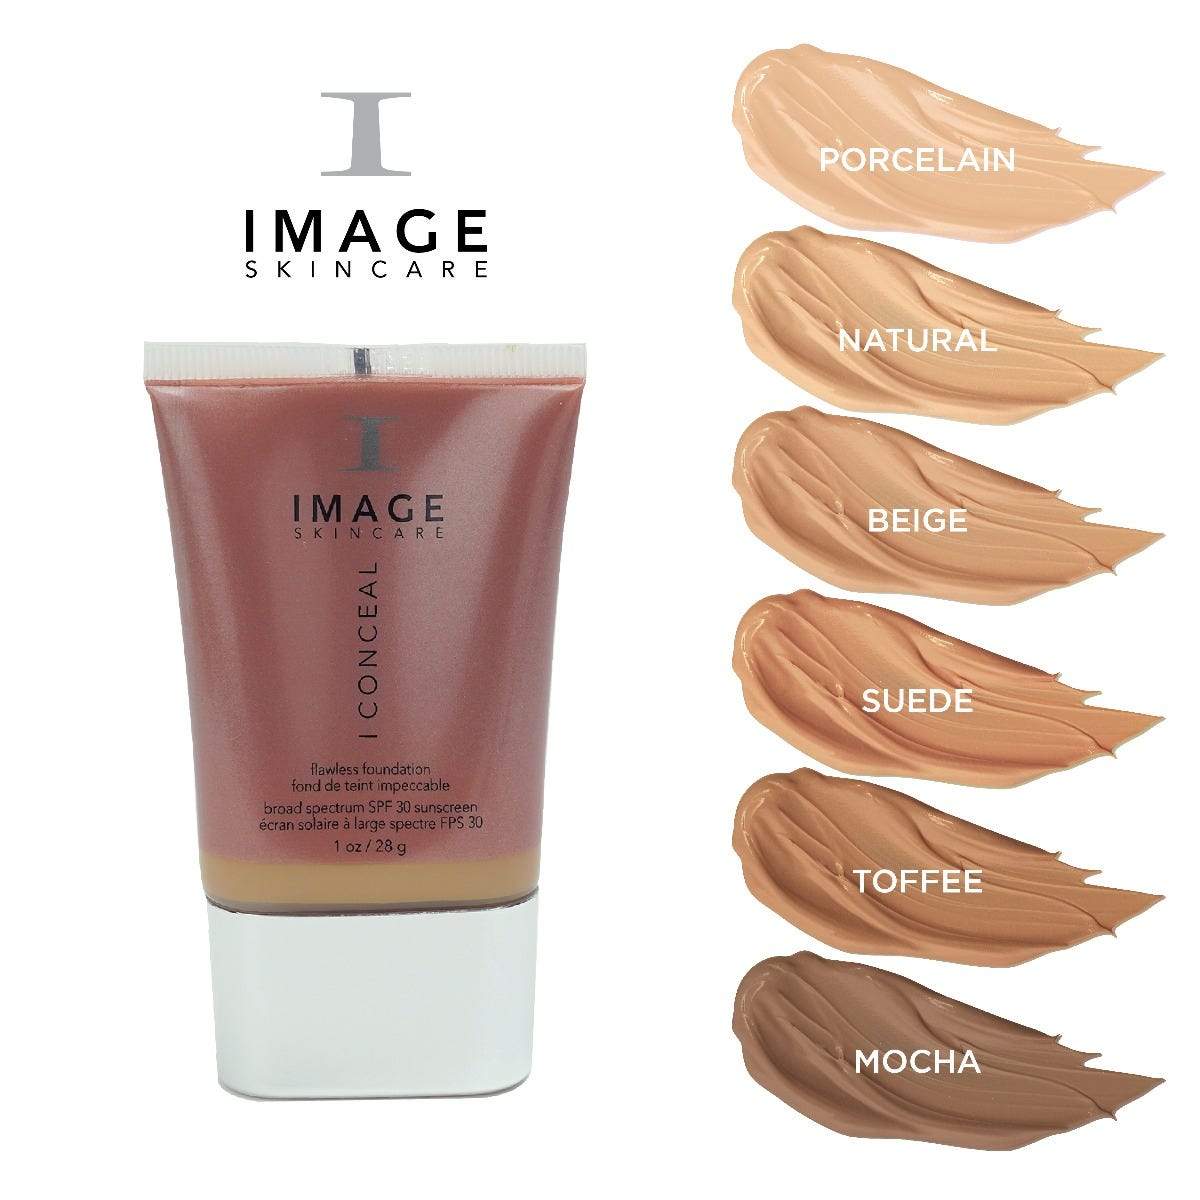 I CONCEAL flawless foundation broad-spectrum SPF 30 sunscreen porcelain